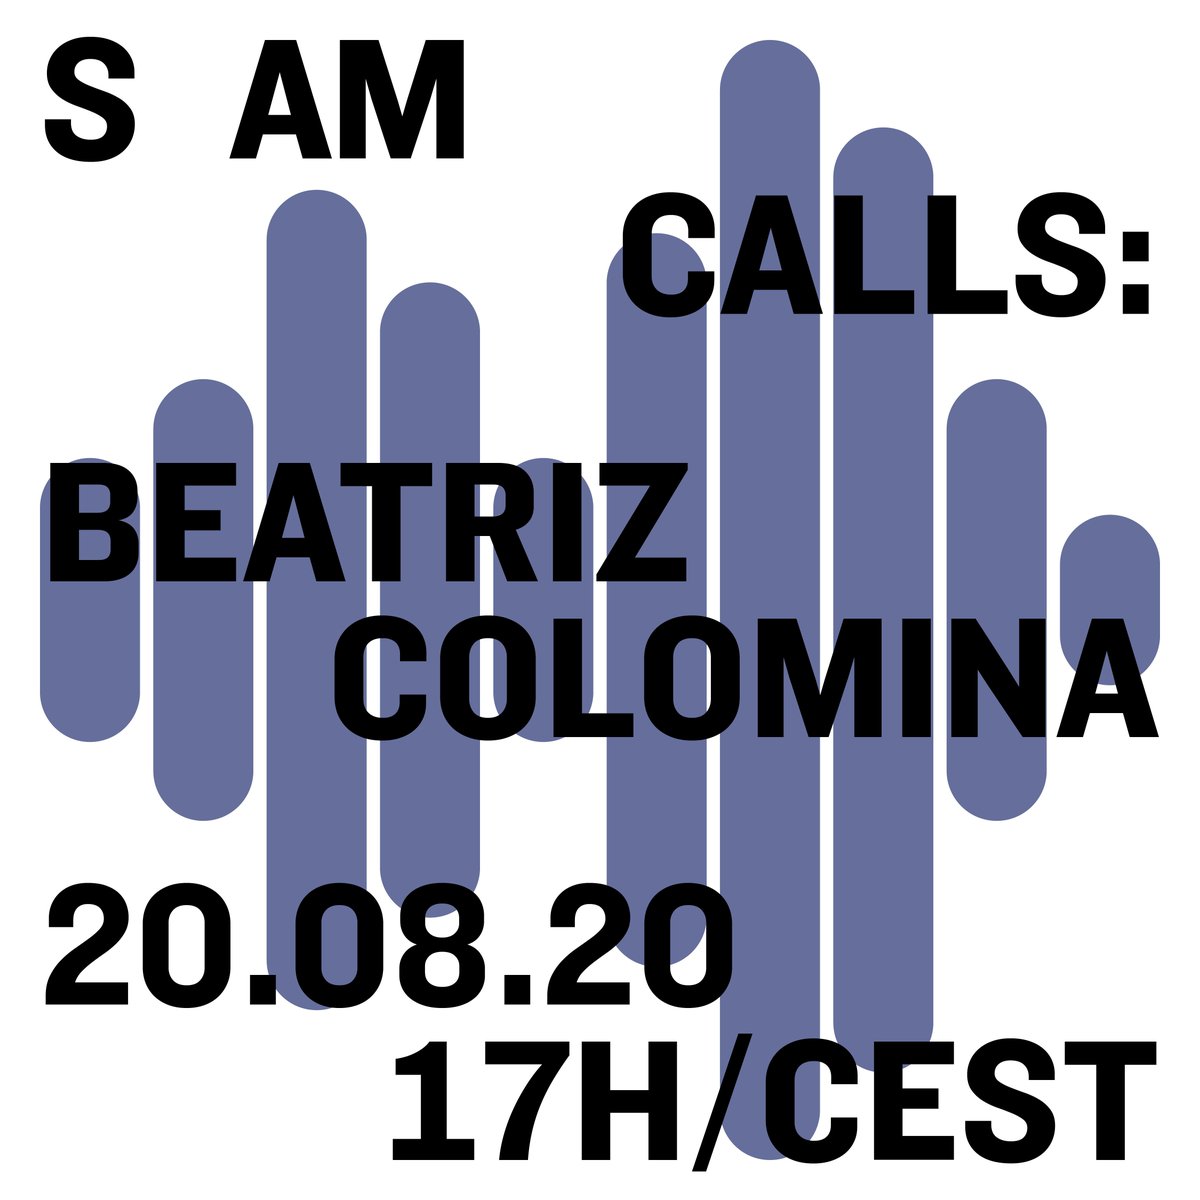 Tomorrow, at 17H CEST / 11H EST, please join us for our next #SAMCalls conversation with #BeatrizColomina, architectural historian, professor, and founder @MediaModernity Program at @PrincetonSoA. Live on our Instagram (@s_am_basel) here: buff.ly/39bENuK